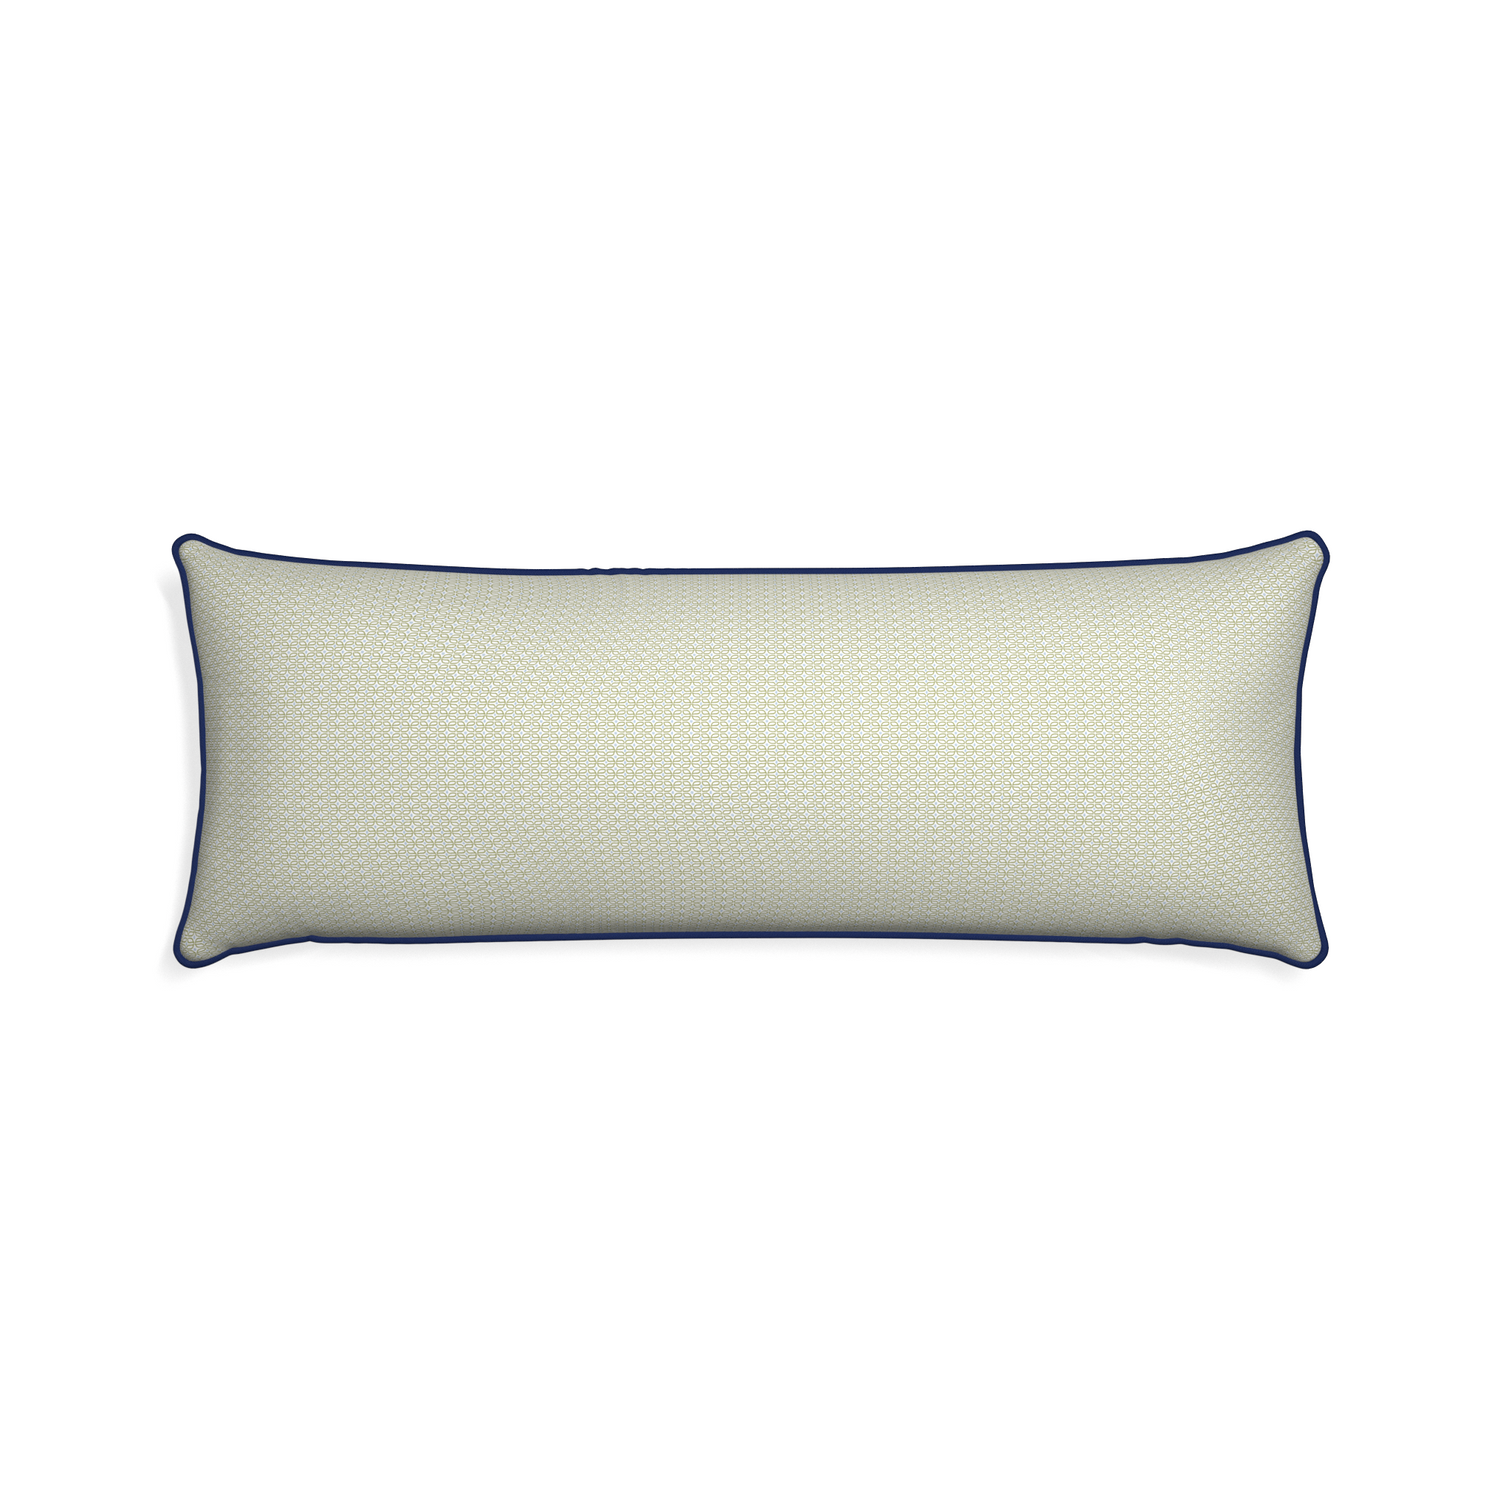 Xl-lumbar loomi moss custom pillow with midnight piping on white background